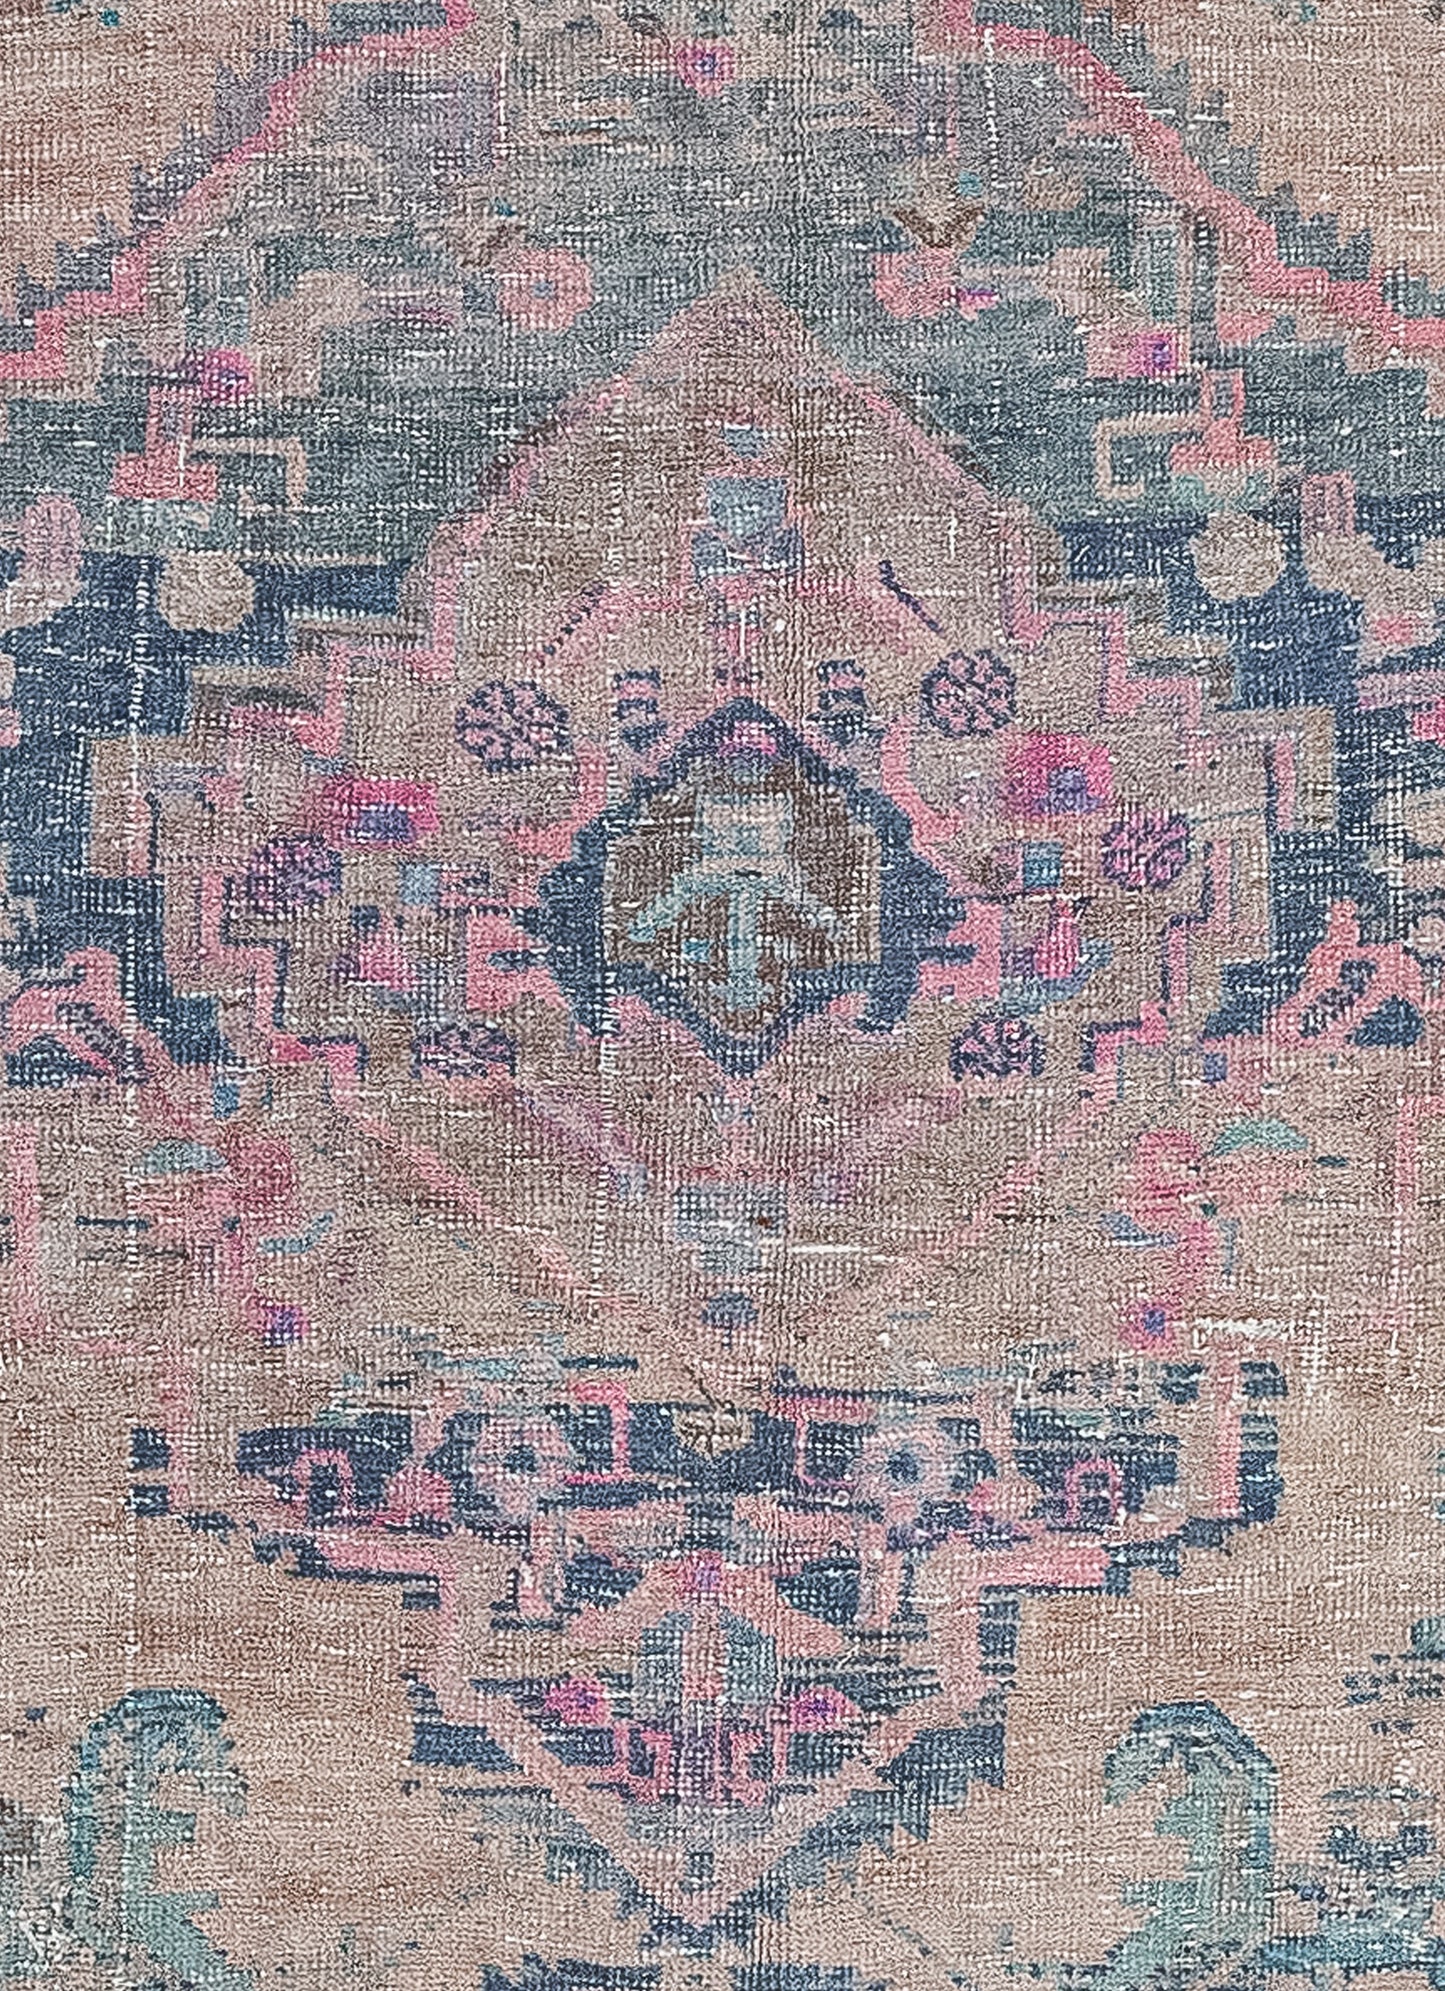 The rug's center features a strange composition that is pleasing to the eye.